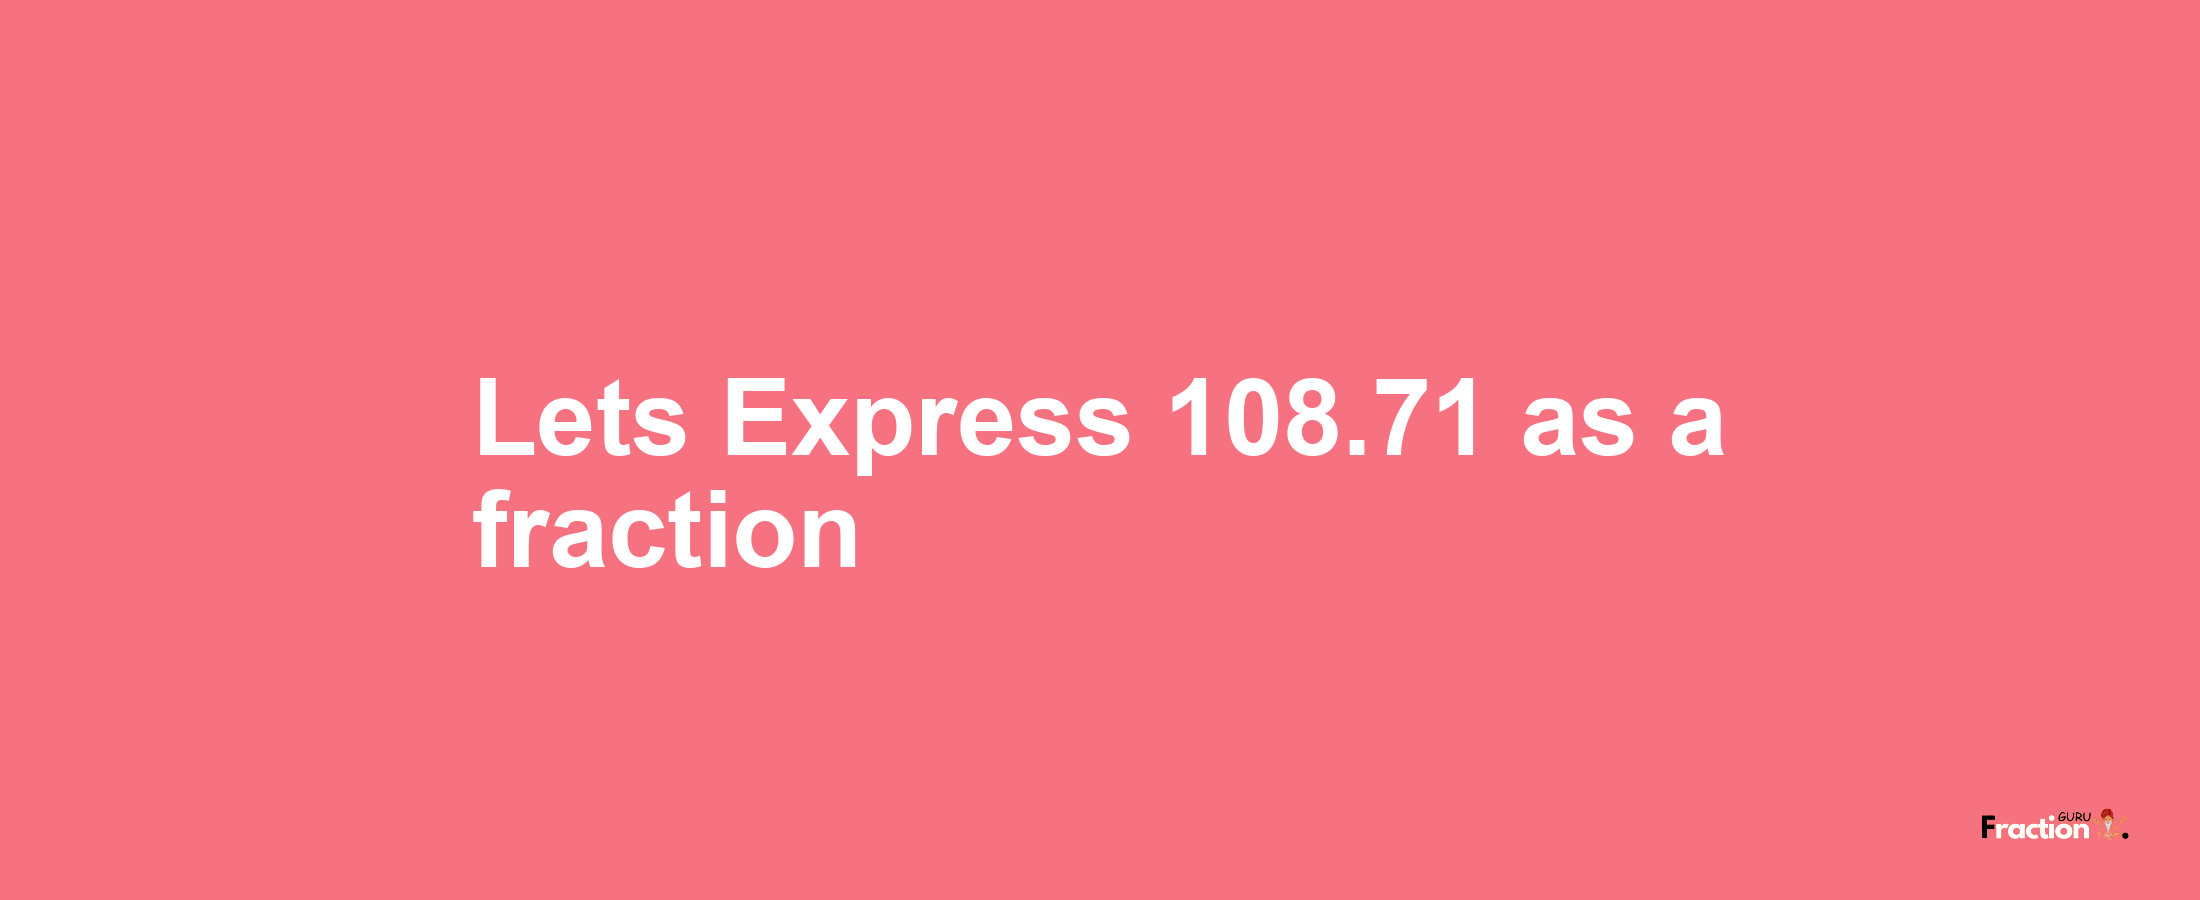 Lets Express 108.71 as afraction